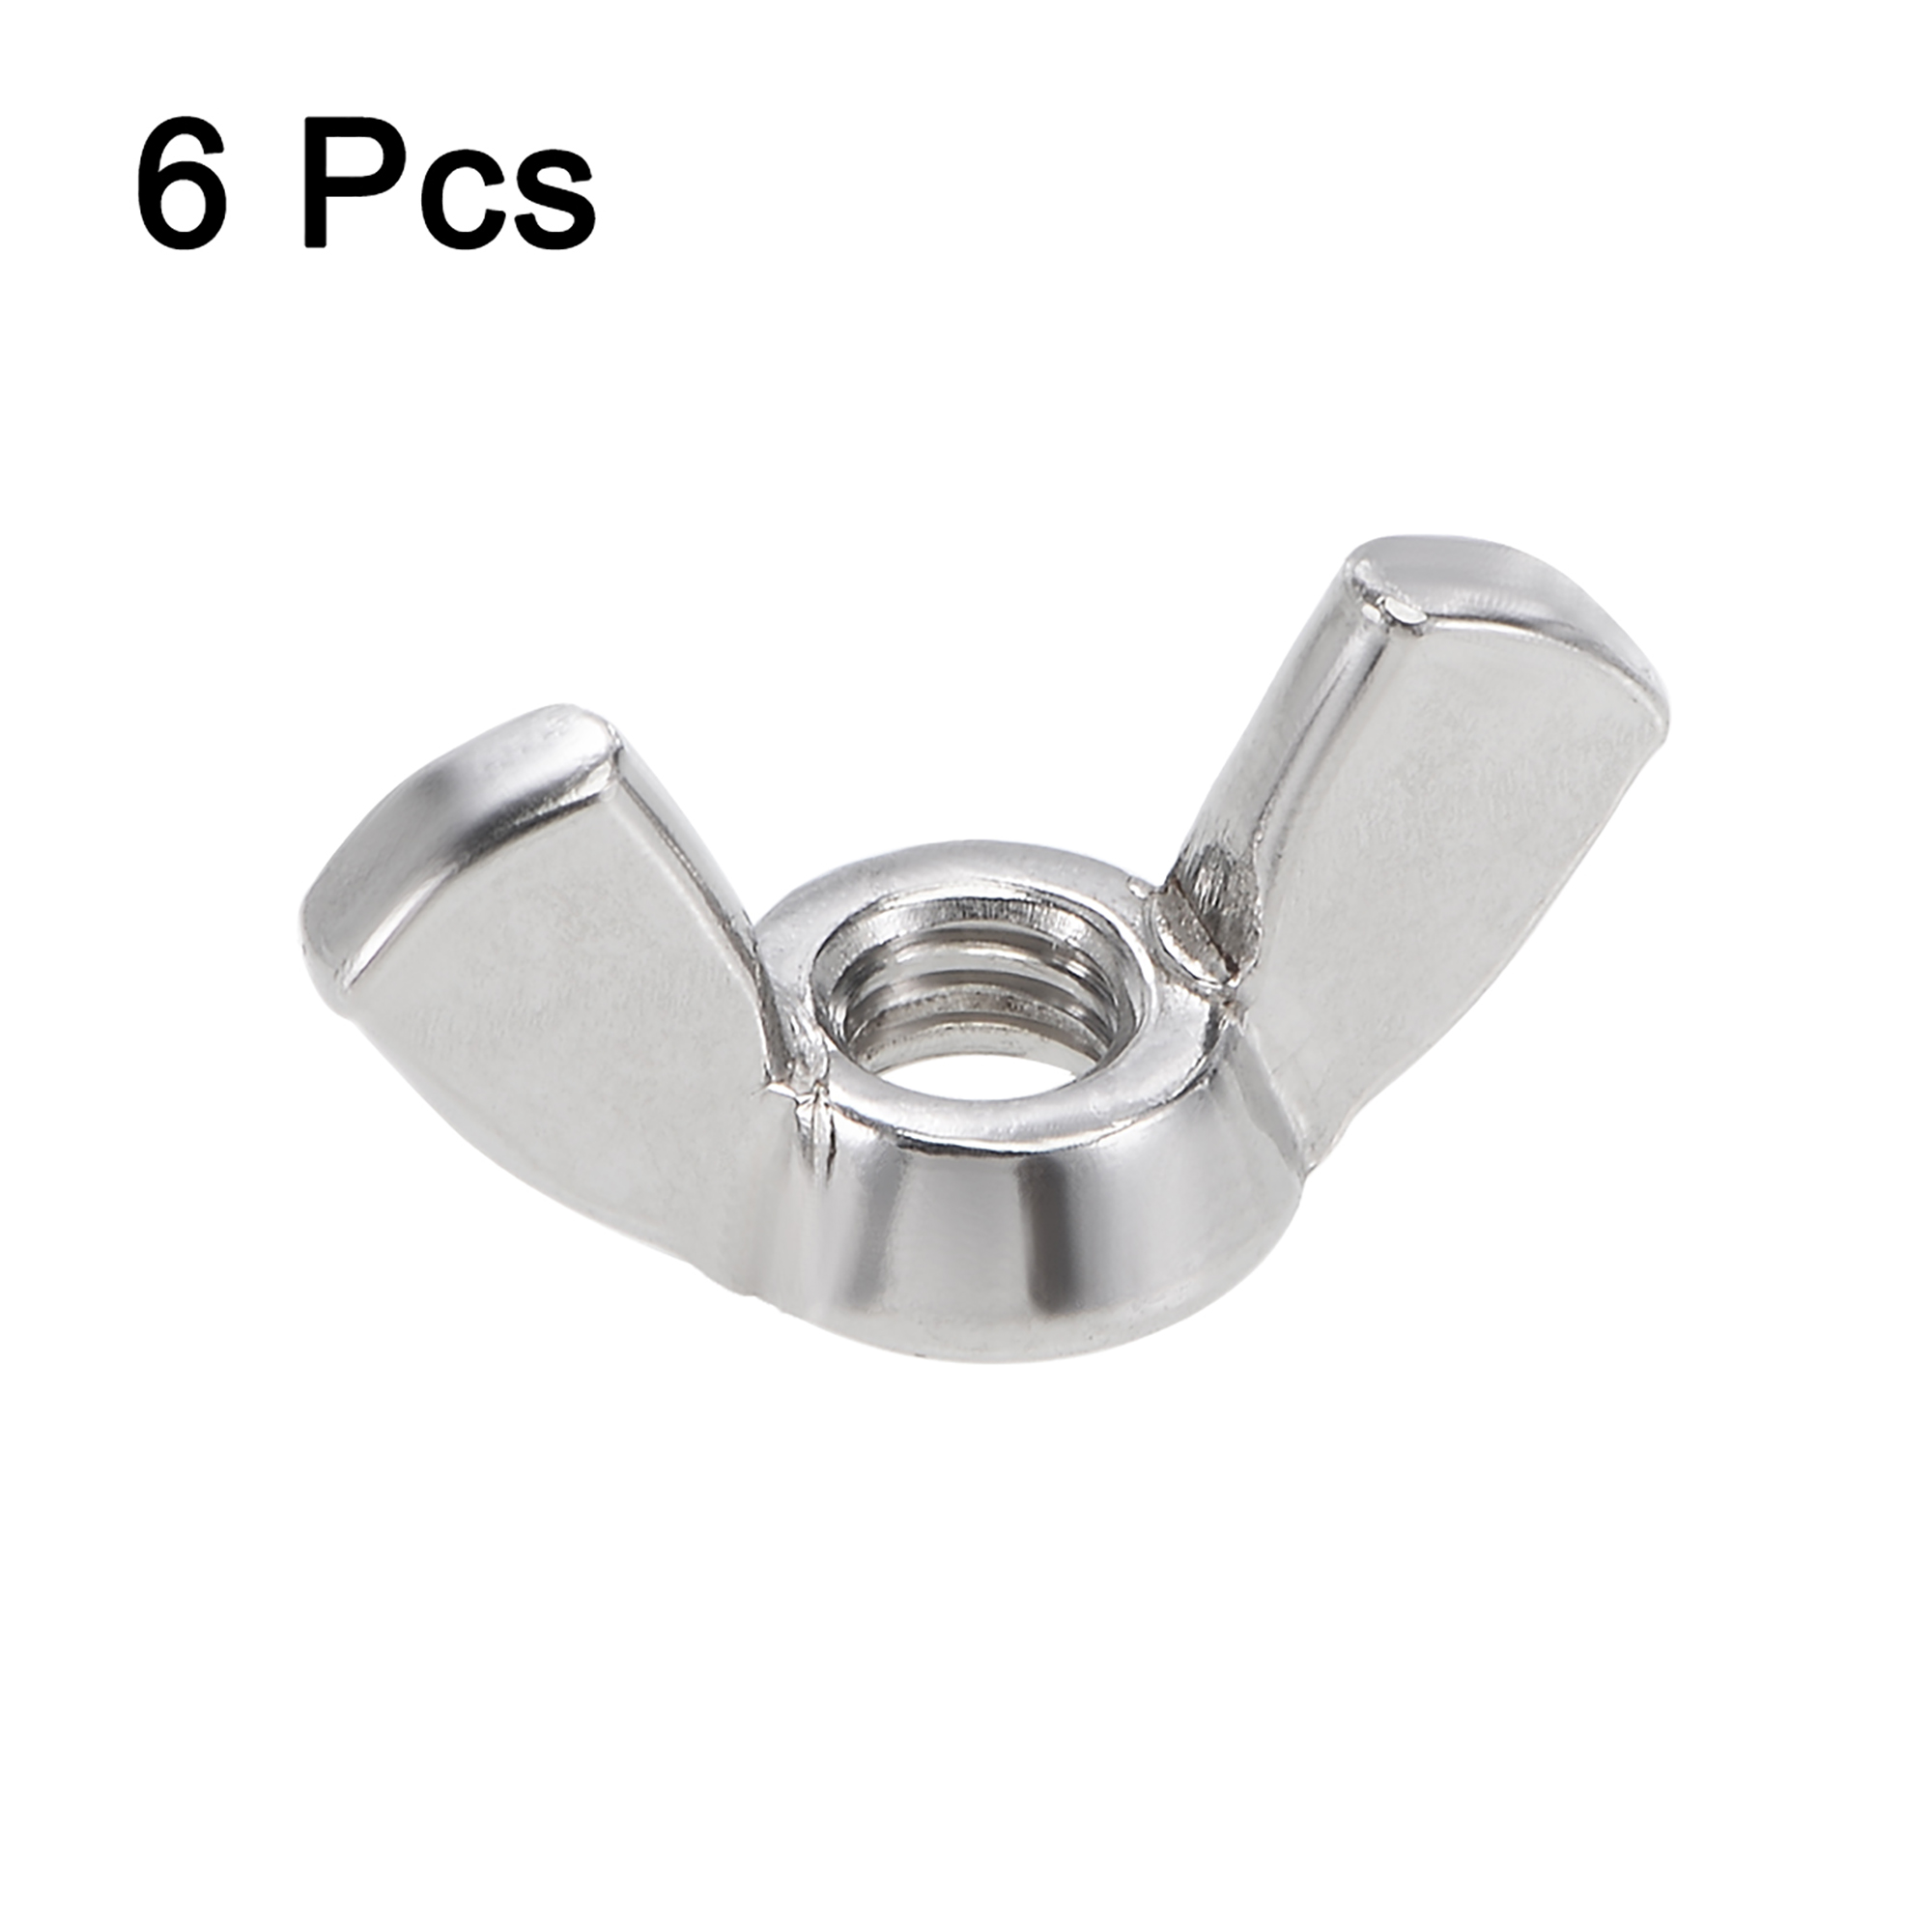 10-32 Wing Nuts 304 Stainless Steel Shutters Butterfly Nut Hand Twist Tighten Fasteners 6pcs - image 2 of 4